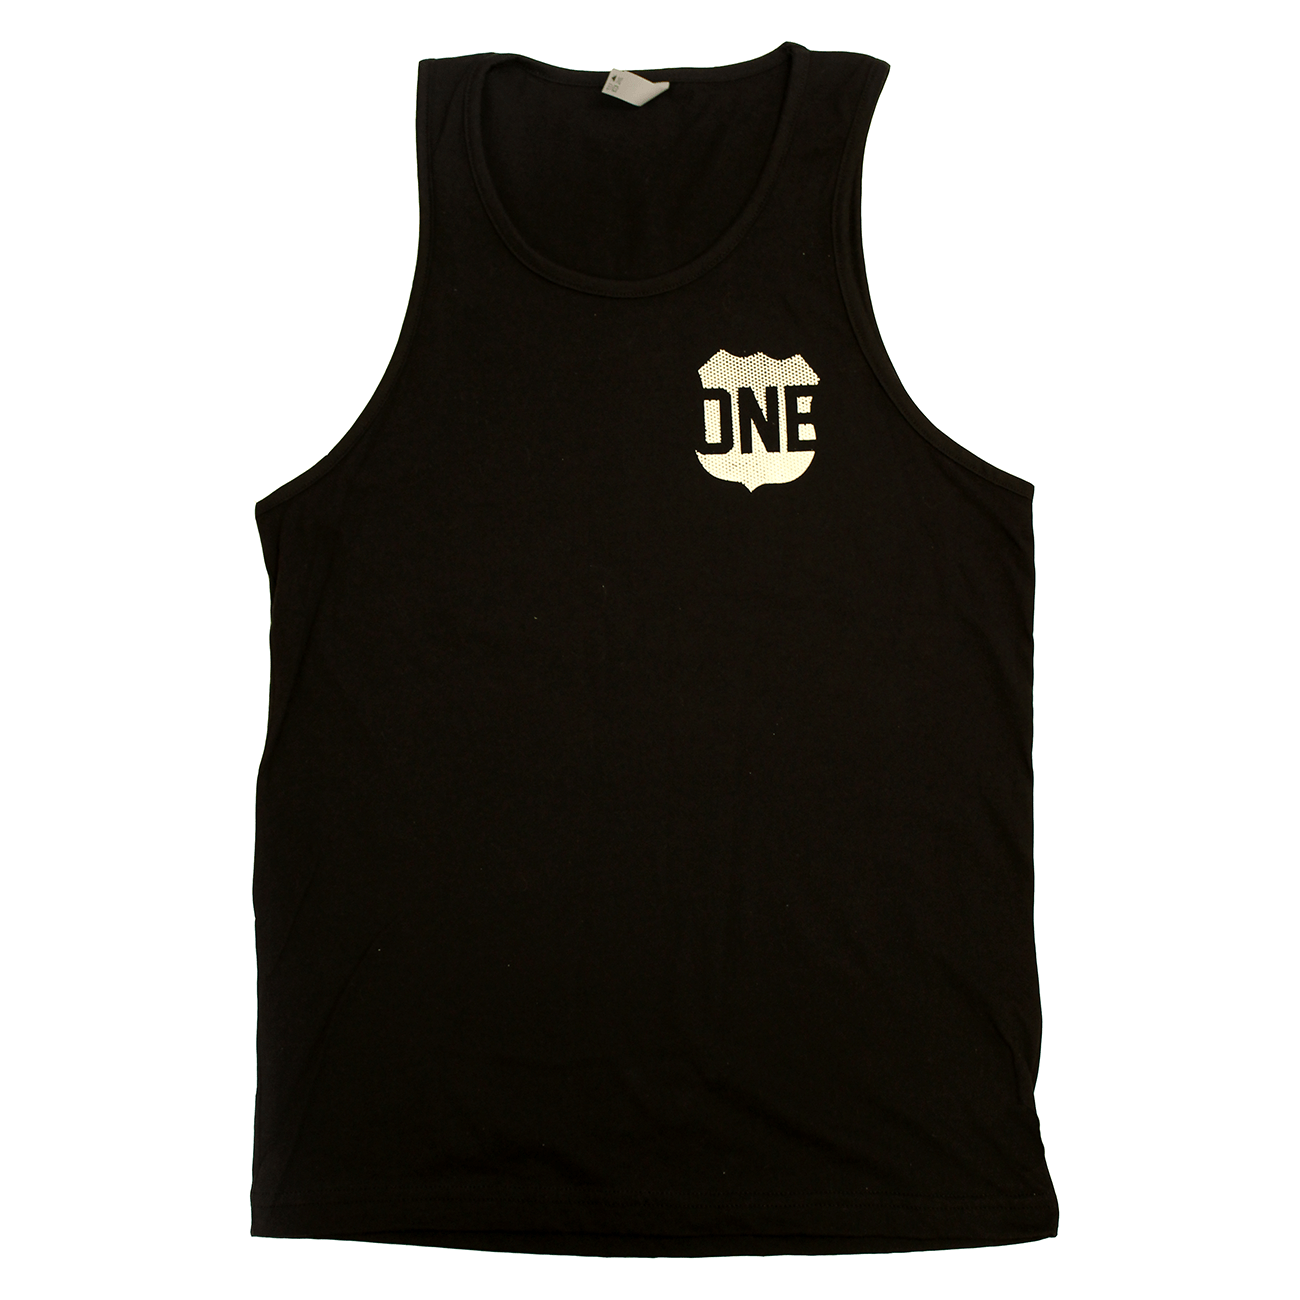 Route One Apparel Classic Flag & Crab (Black) /  Tank - Route One Apparel